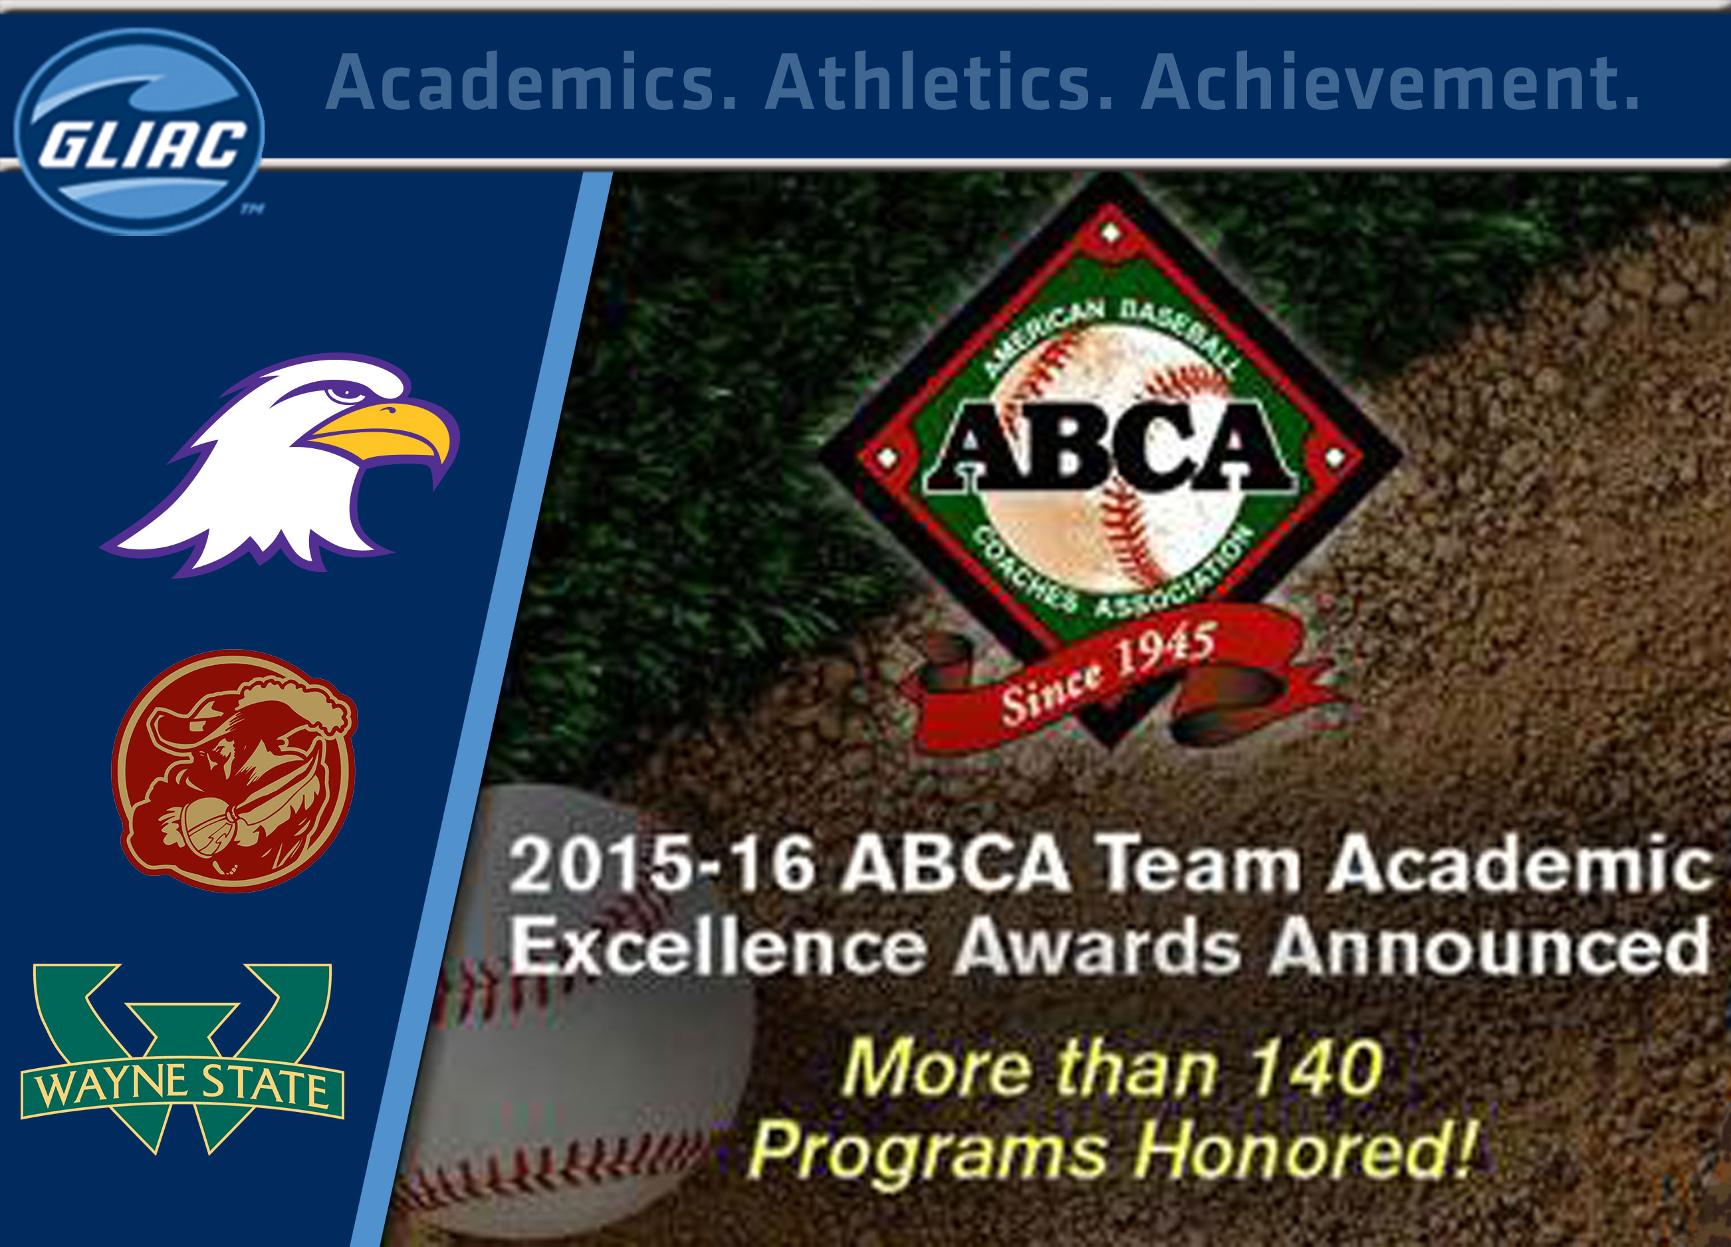 Ashland, Walsh, and Wayne State Named ABCA Academic Excellence Team Awards